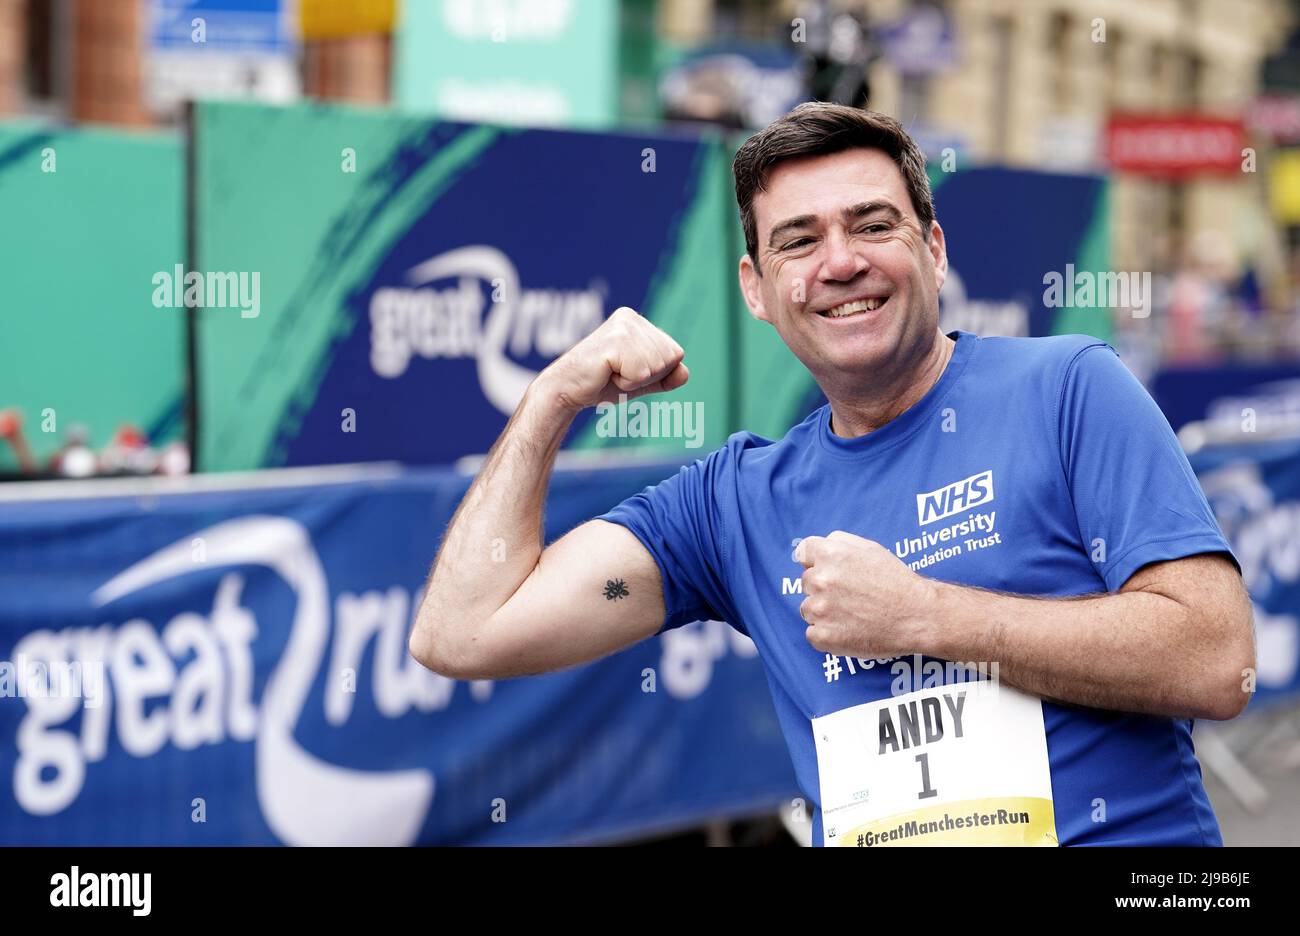 Mayor of Greater Manchester Andy Burnham shows his Manchester worker bee (symbol of Manchester) tattoo ahead of the Great Manchester Run through Manchester city centre, to mark the five-year anniversary of the Manchester Arena bombing. The day will be the first time in three years that people in Manchester can mark the anniversary free of coronavirus restrictions. Picture date: Sunday May 22, 2022. Stock Photo